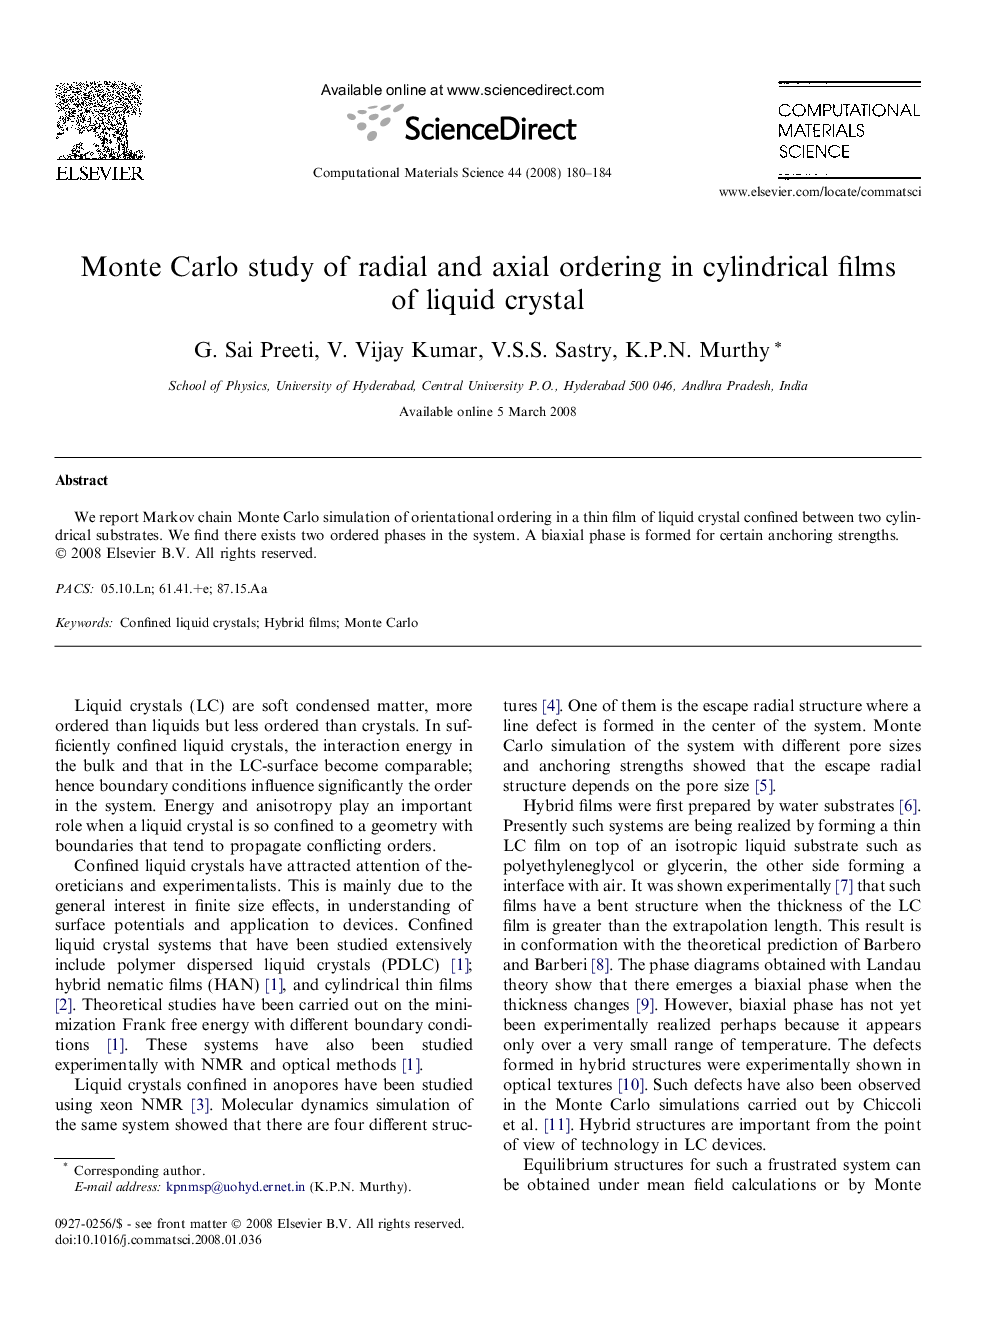 Monte Carlo study of radial and axial ordering in cylindrical films of liquid crystal